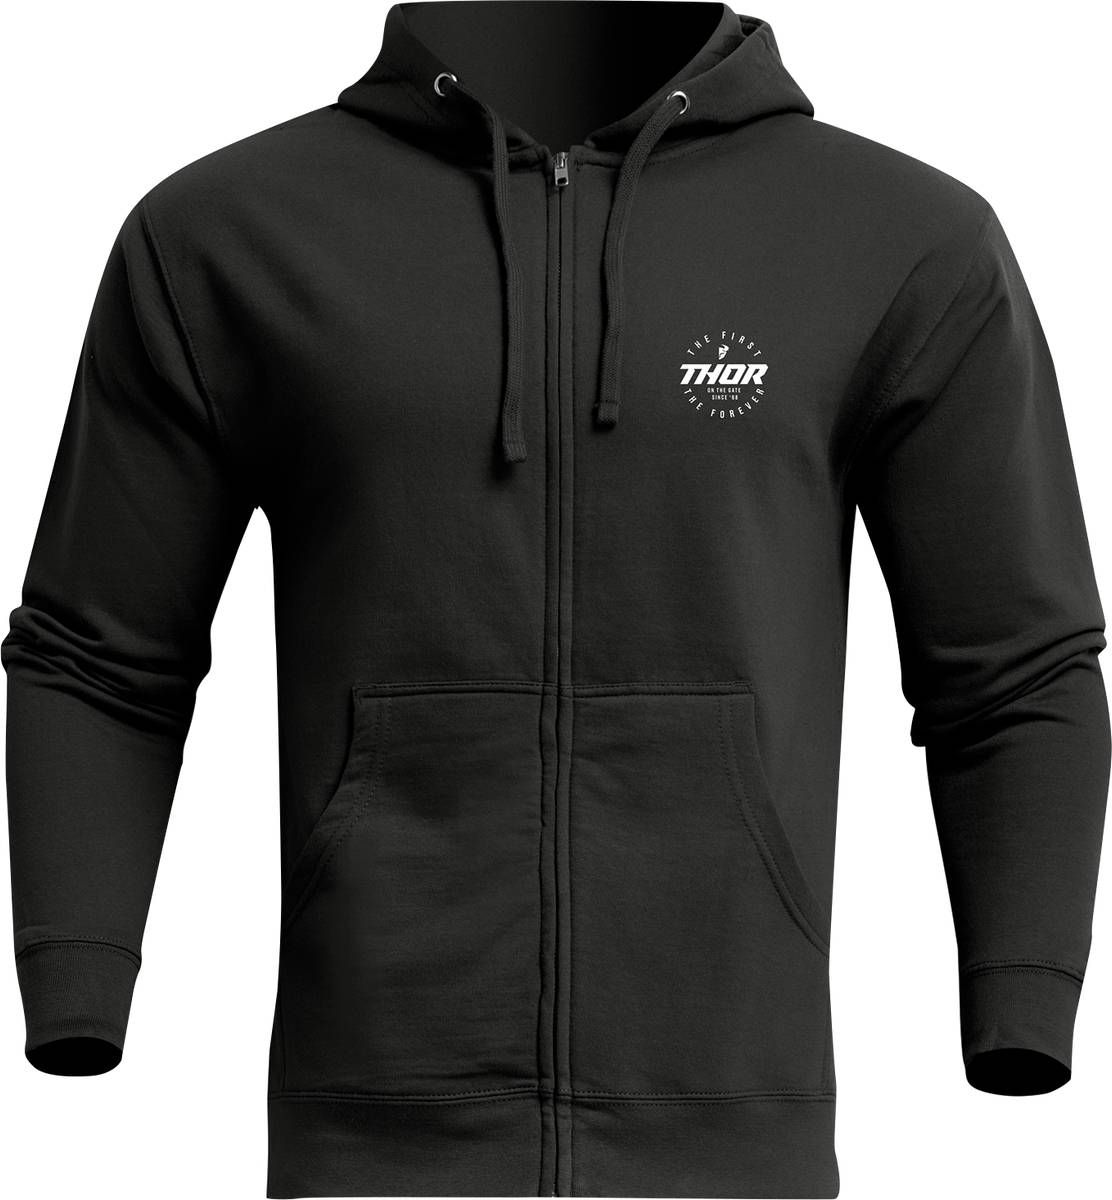 Find your perfect style at Thor Stadium Zip-Up Sweatshirt Black Gift ...